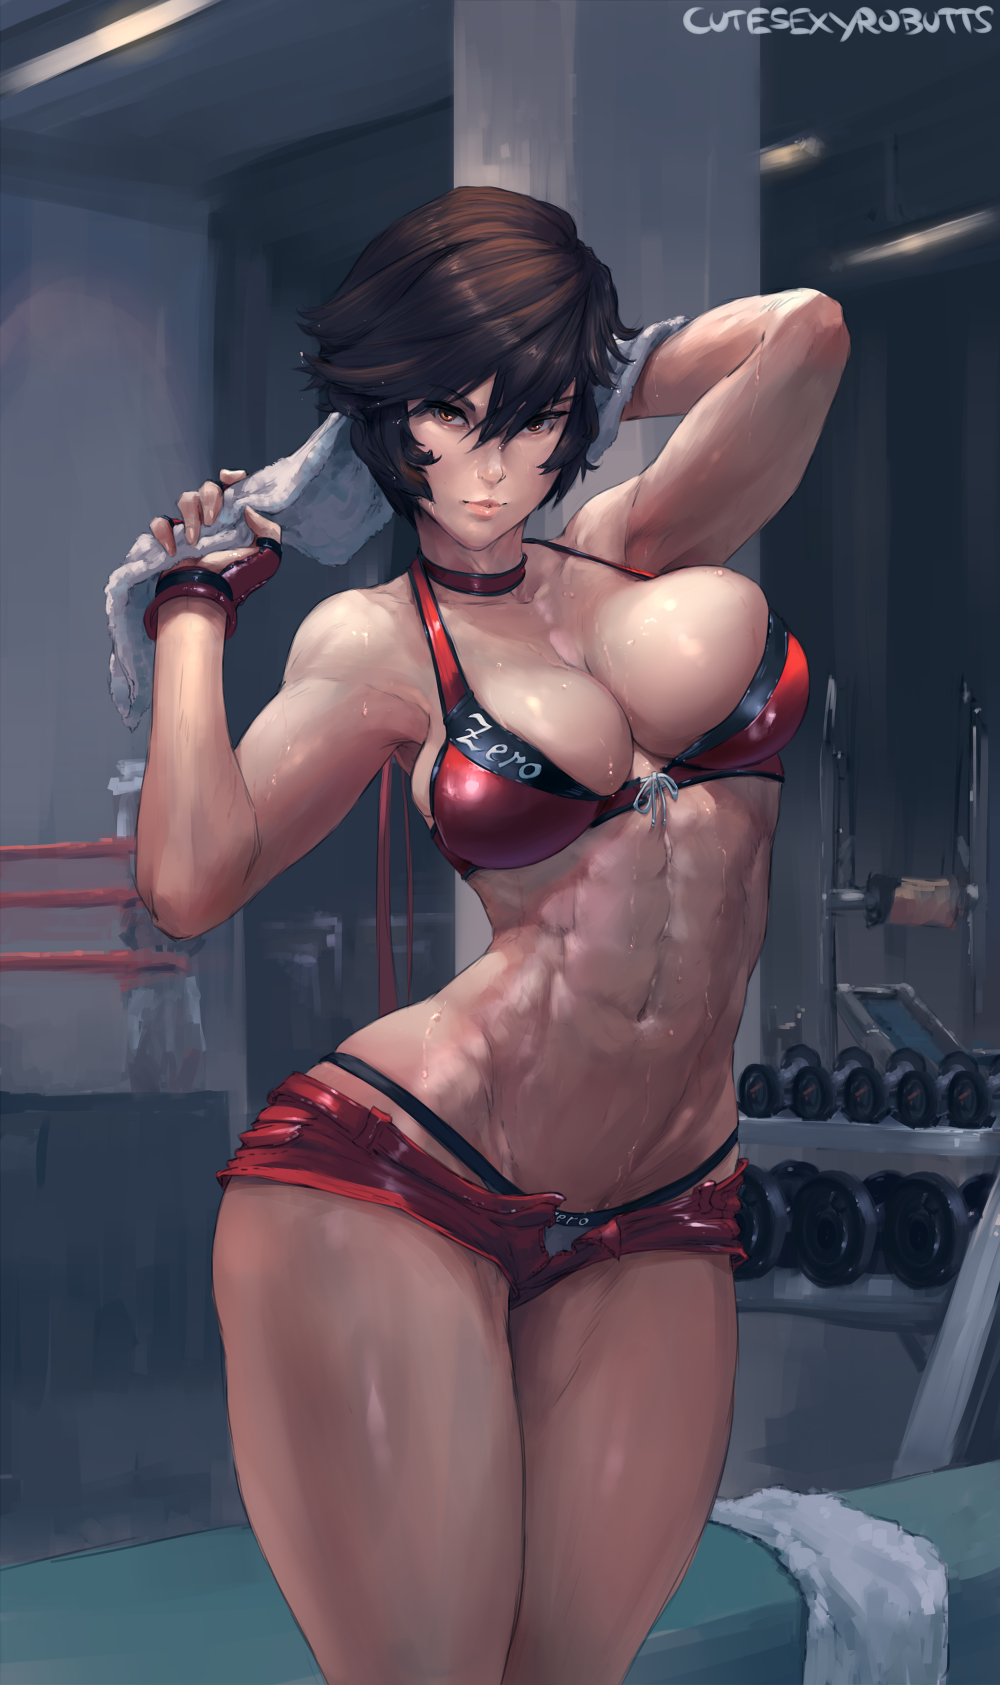 1girl abs alluring athletic_female big_breasts breasts cleavage cutesexyrobutts female_abs female_only fit_female hinomoto_reiko konami looking_at_viewer reiko_hinomoto rumble_roses